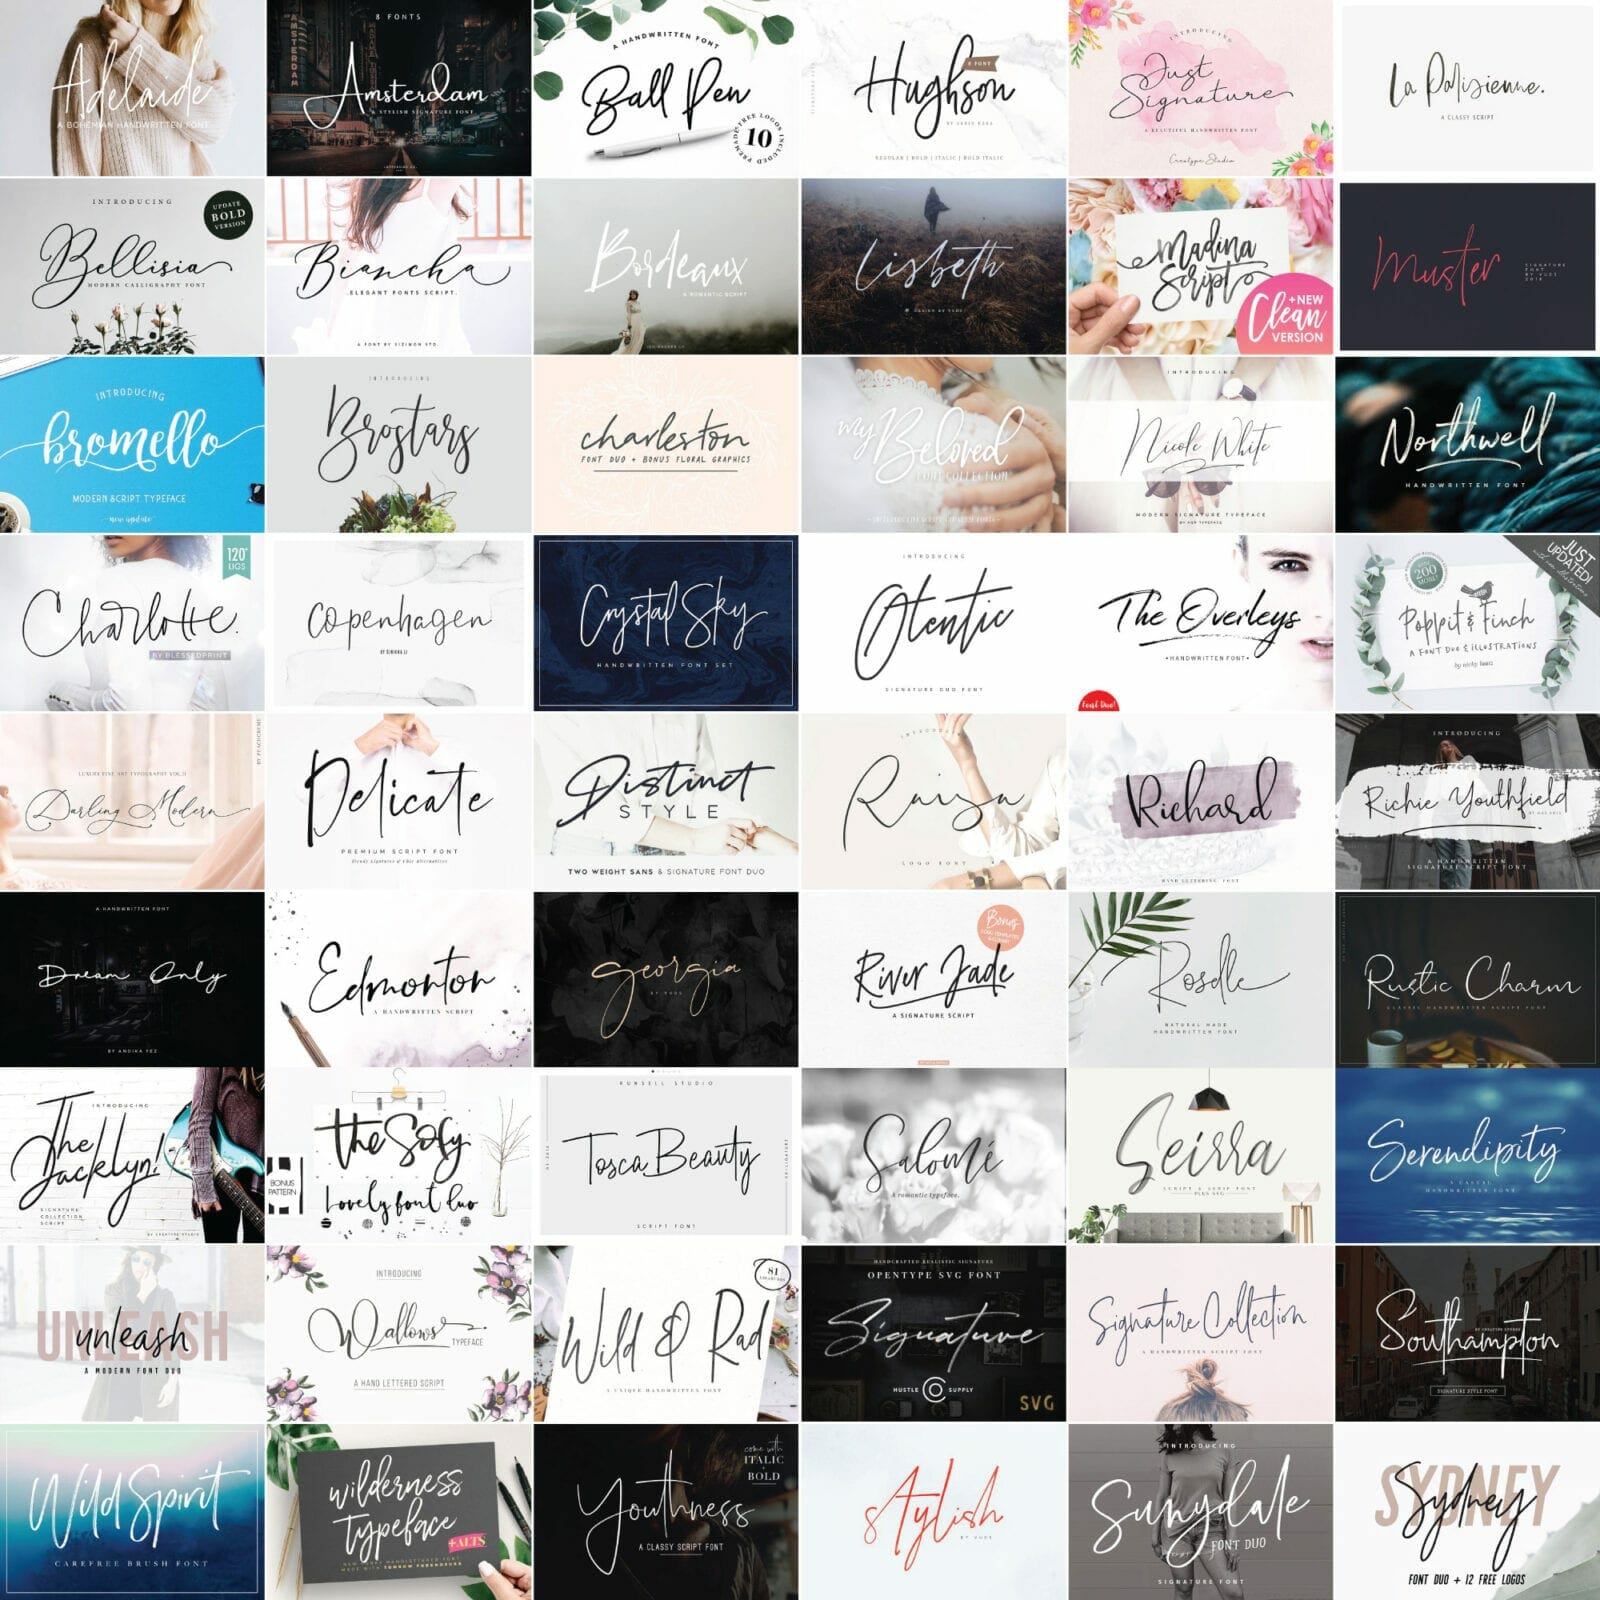 Creating invitations, designing posters, crafting a beautiful site...here are over 50 of the best modern script fonts you need in your font book! These cursive fonts include handlettered styles and modern calligraphy typefaces. #typography #fonts #handlettered #modernscript